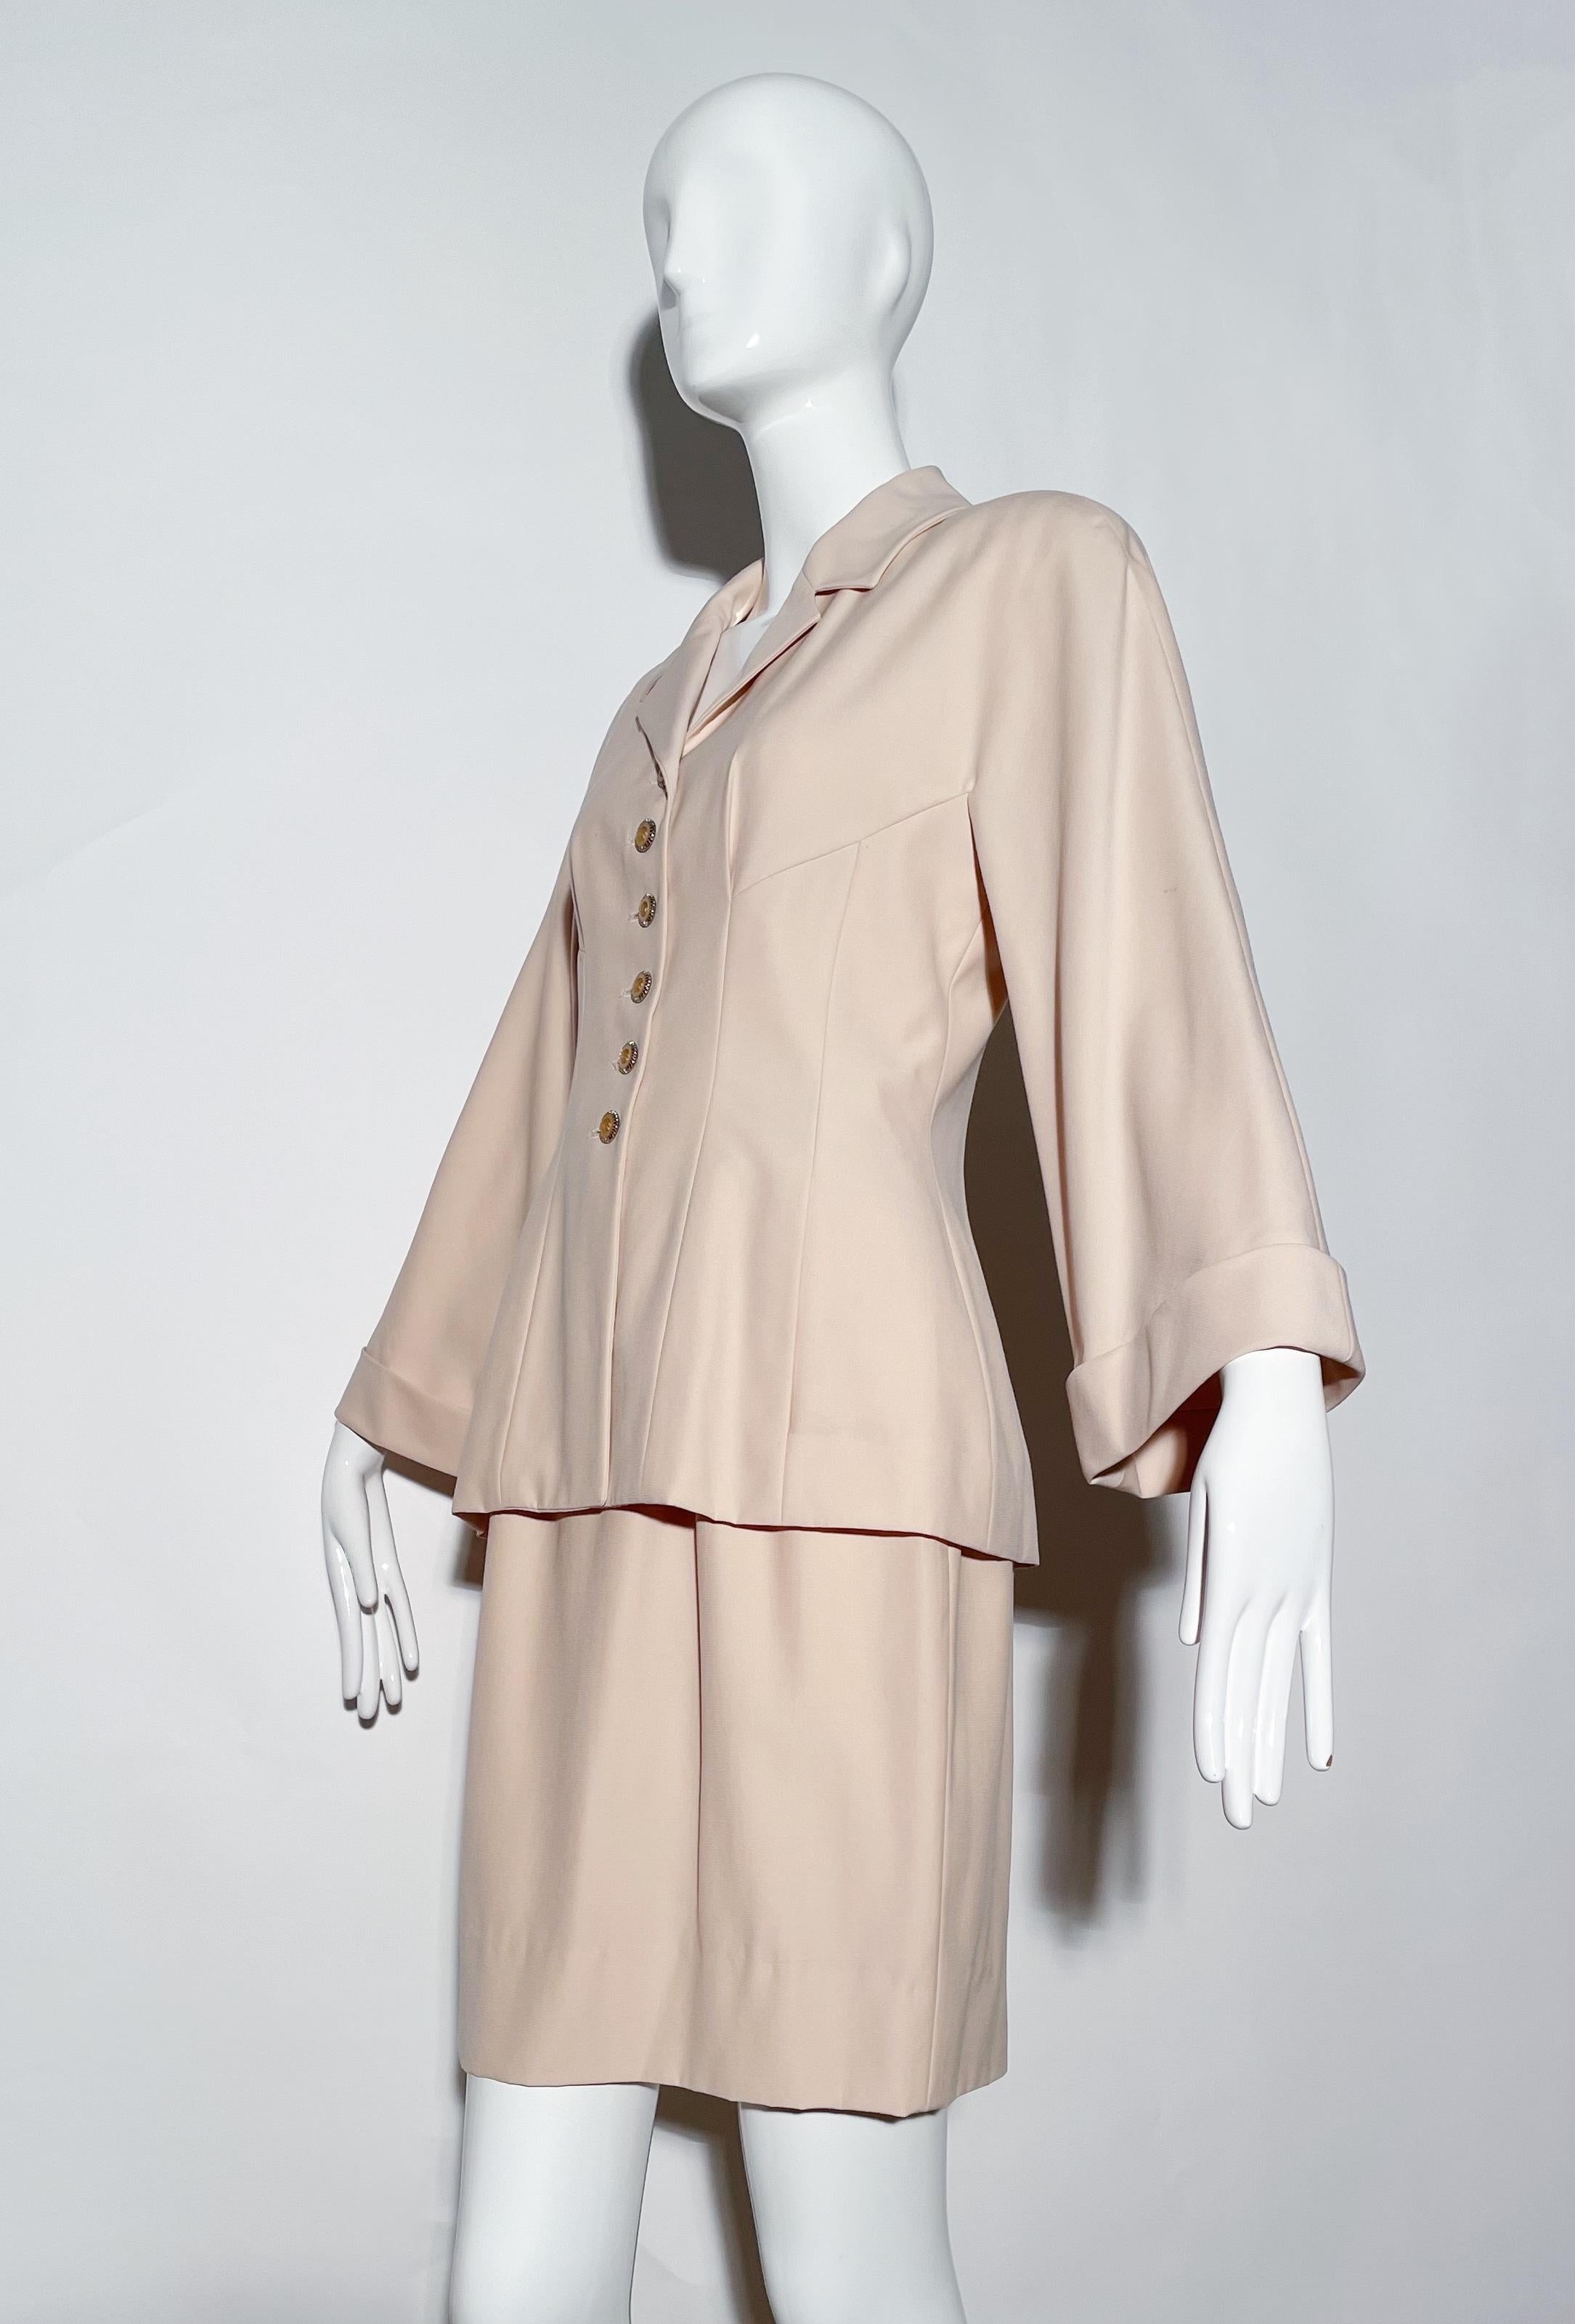 Karl Lagerfeld Blush Skirt Suit In Excellent Condition For Sale In Los Angeles, CA